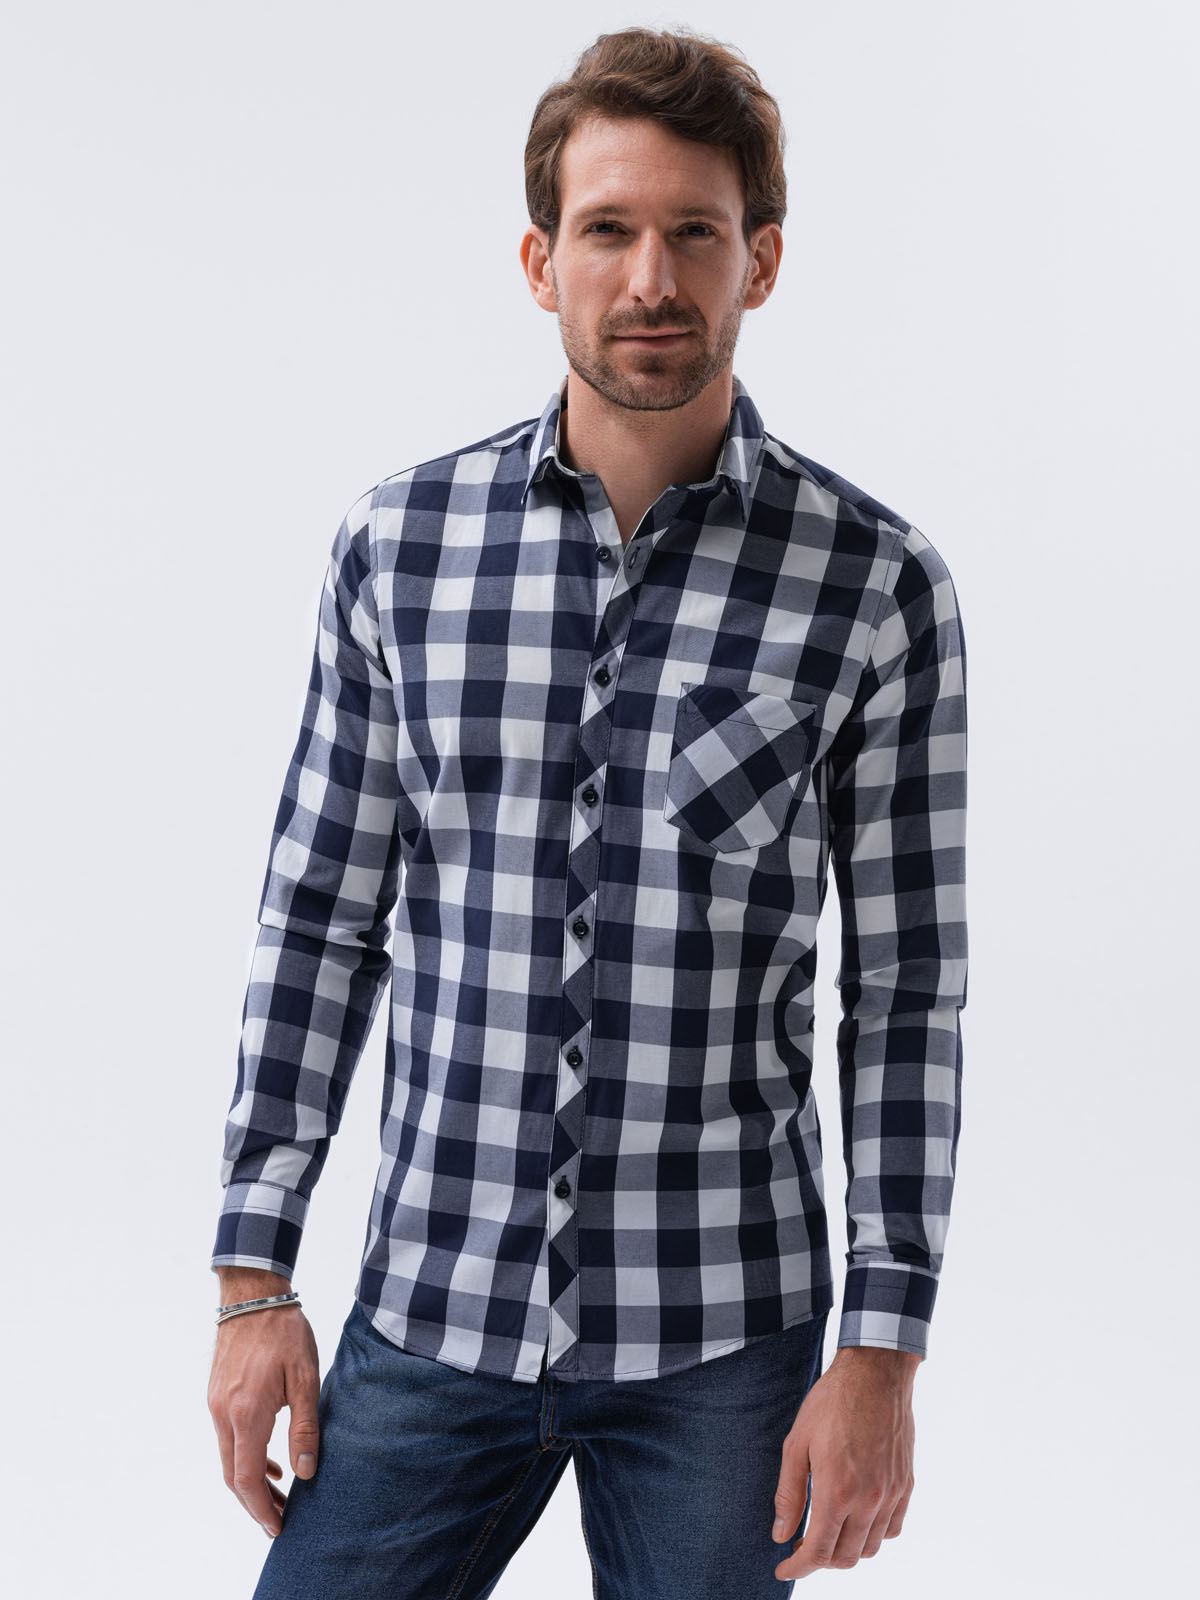 Men's check shirt with long sleeves K282 - navy | MODONE wholesale ...